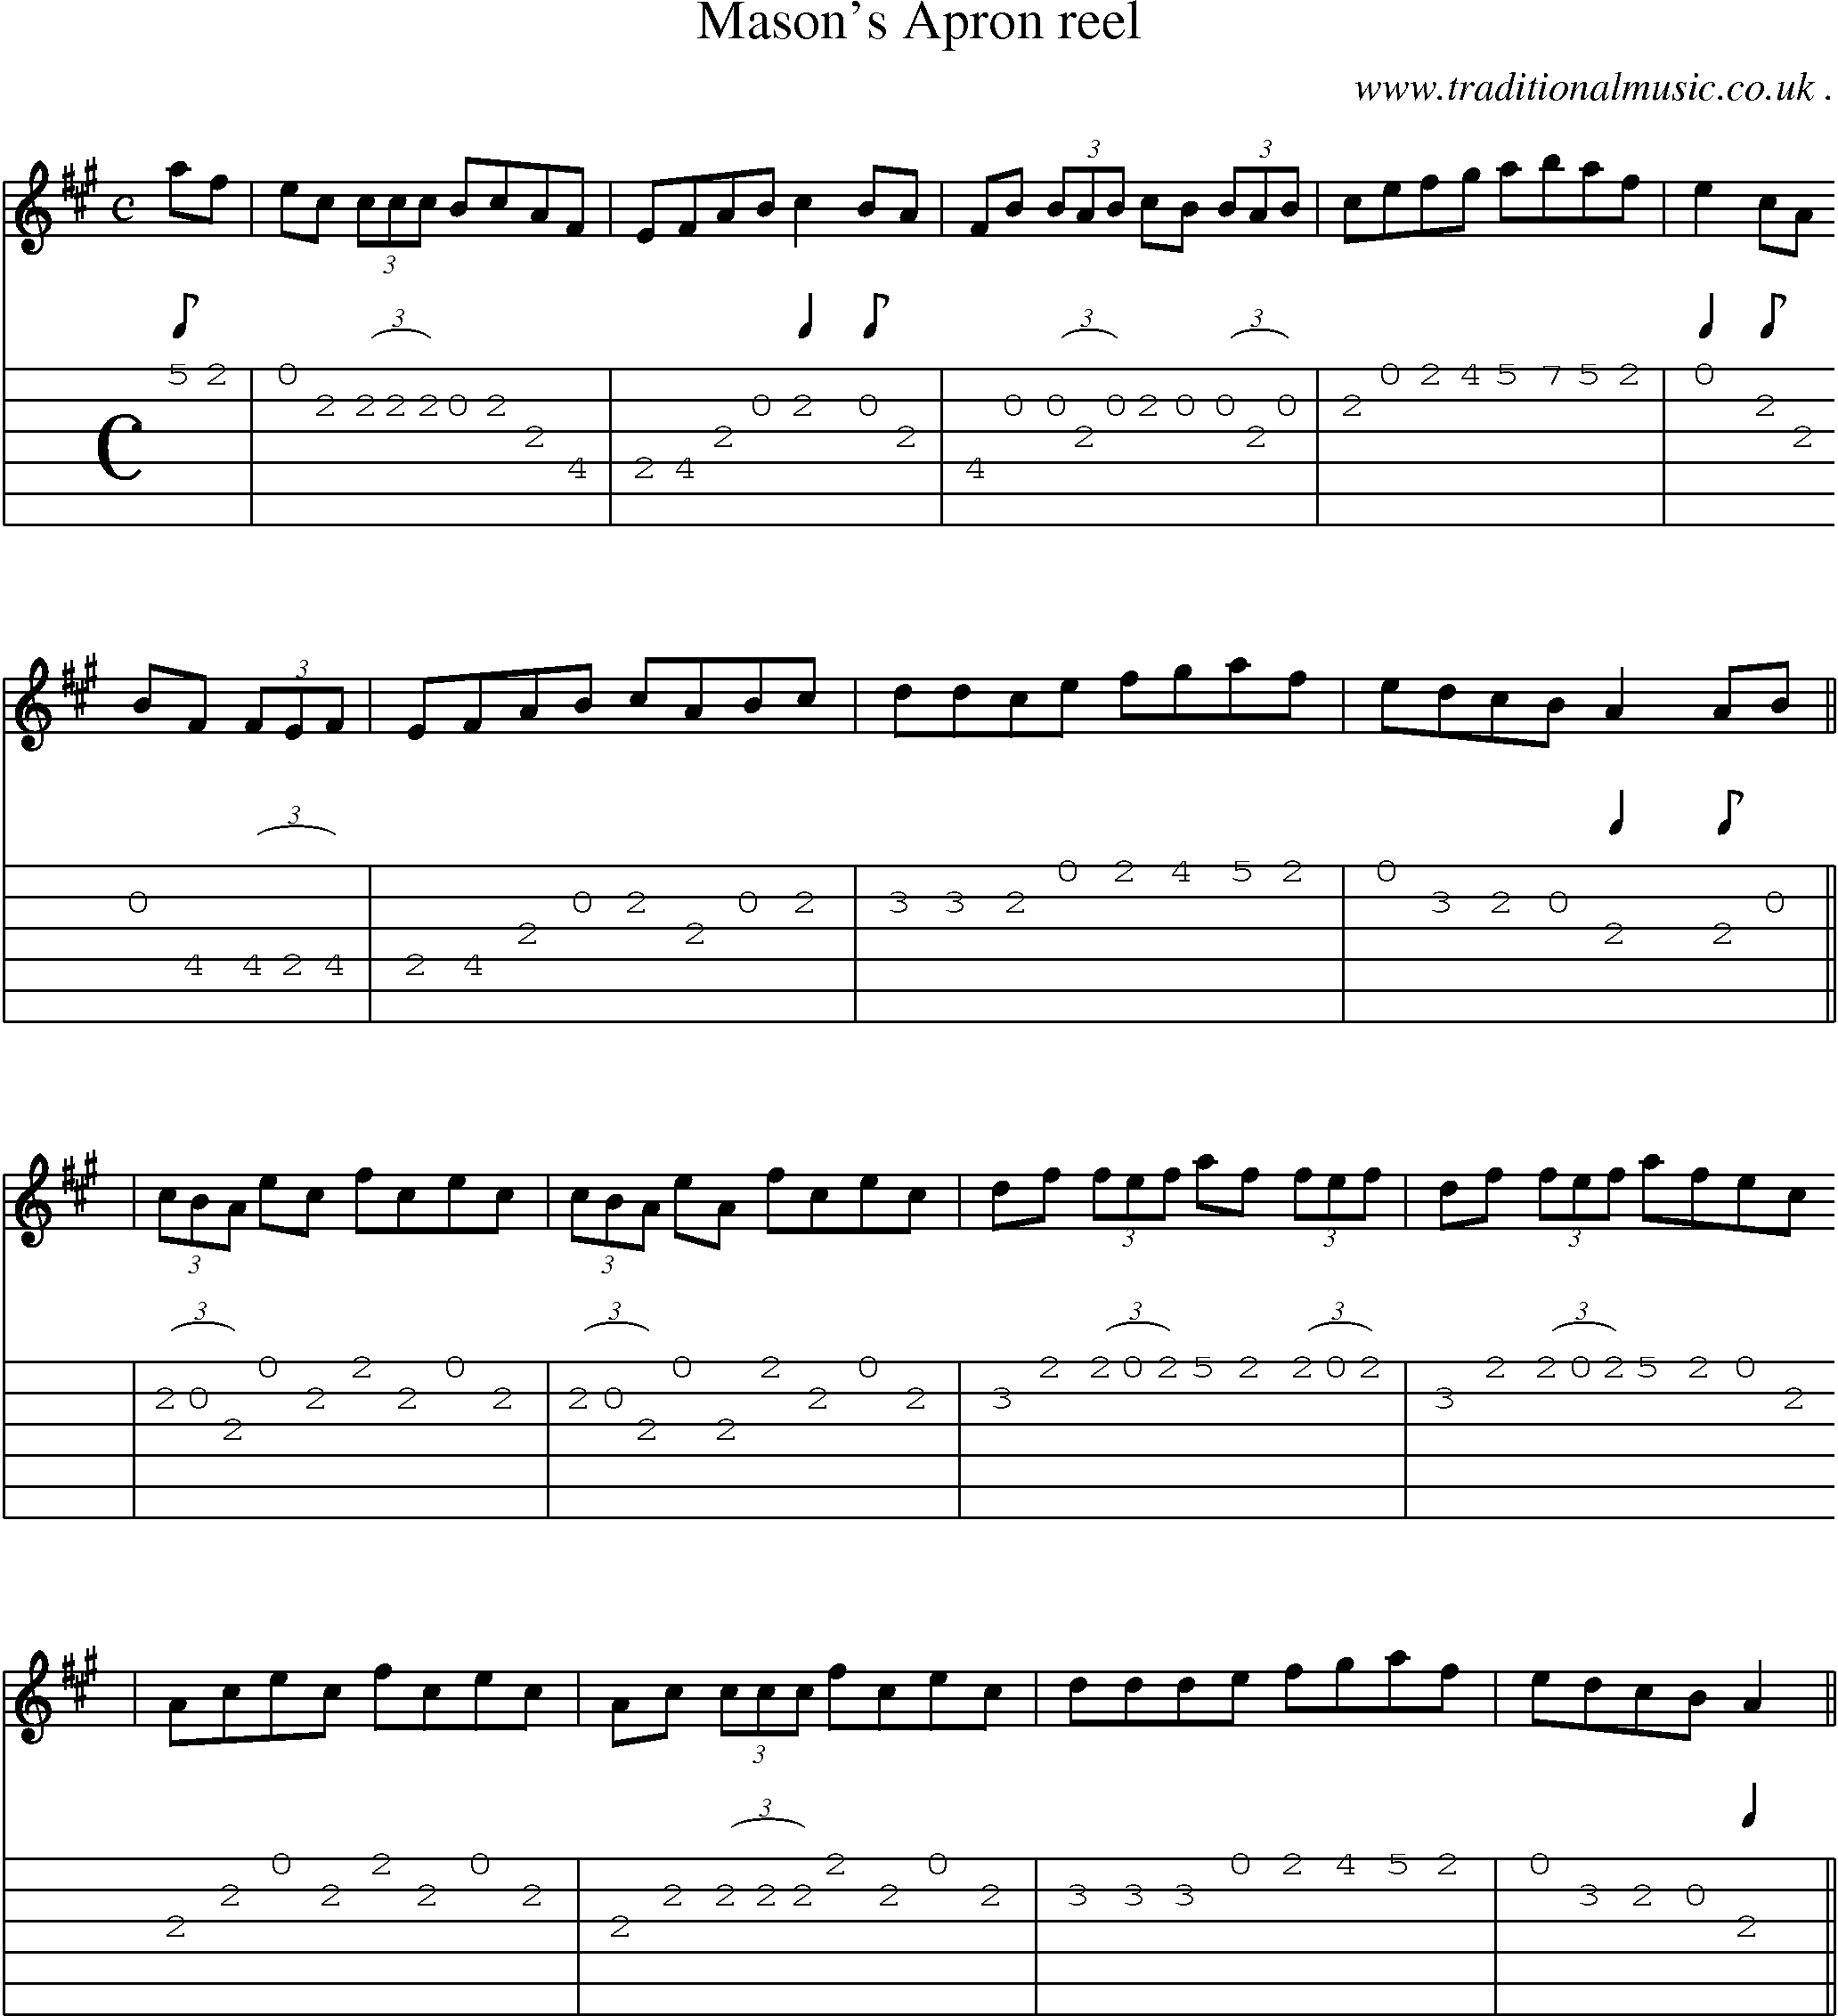 Sheet-Music and Guitar Tabs for Masons Apron Reel